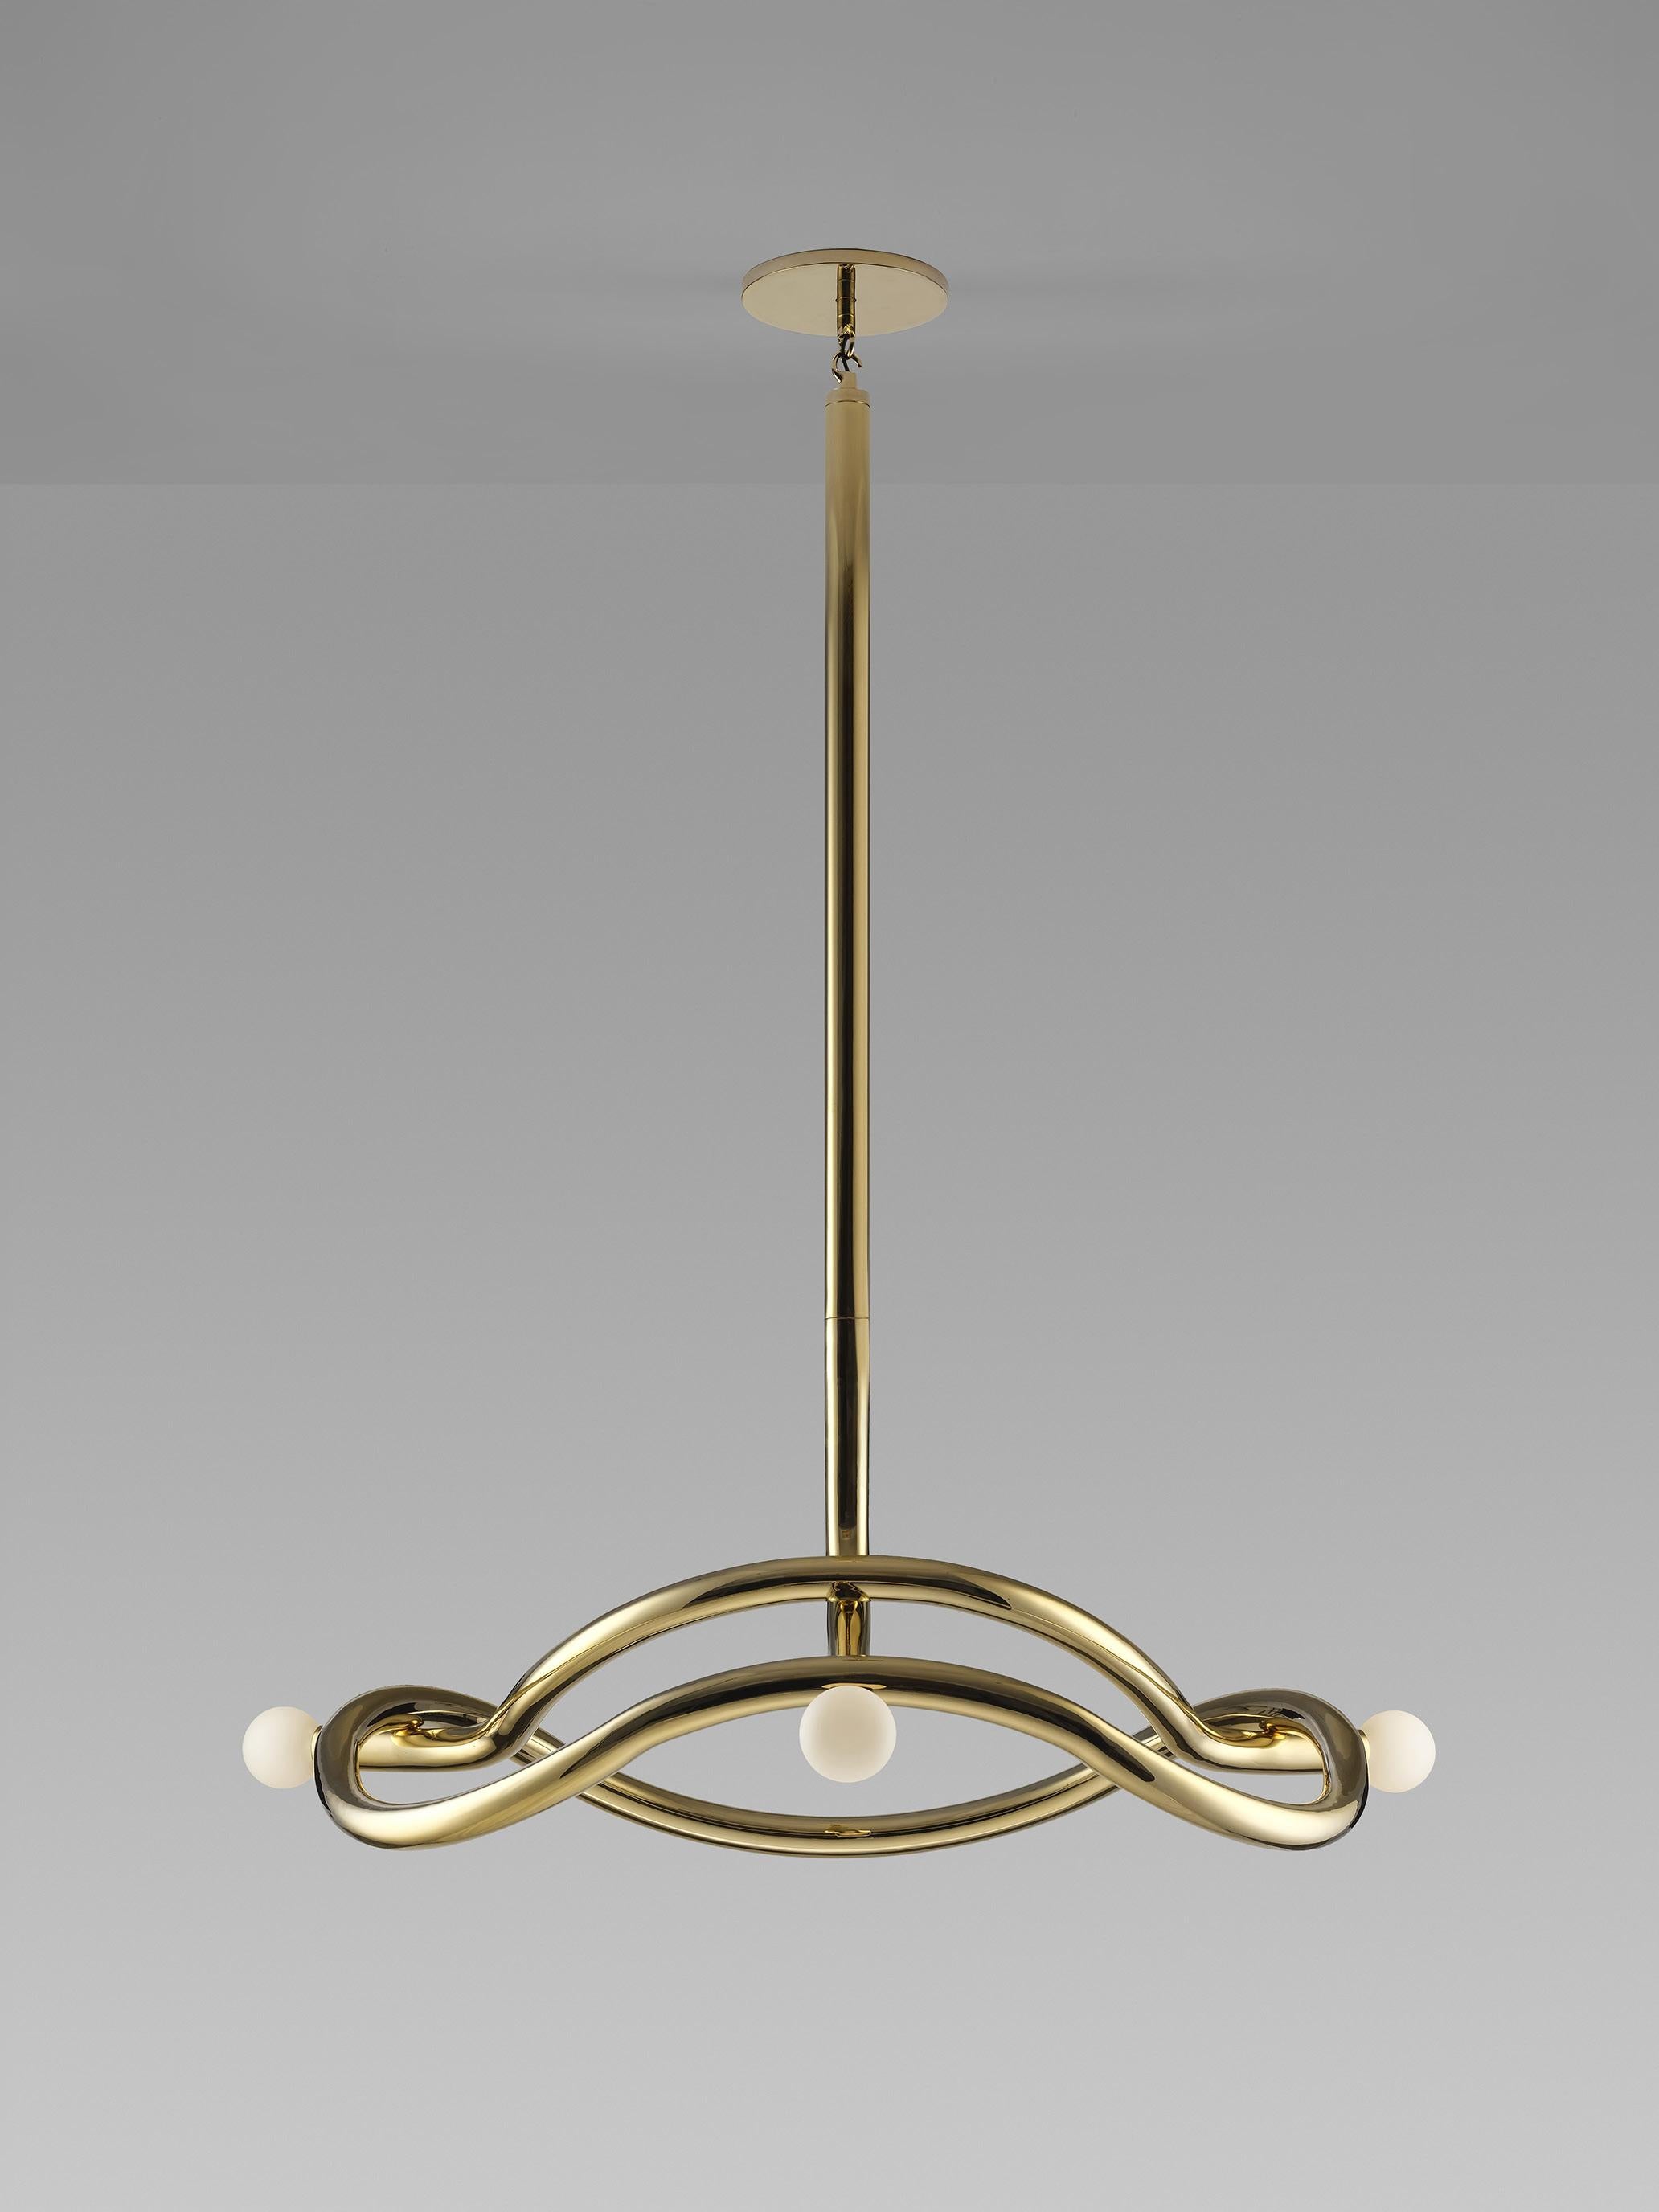 Tryst chandelier by Paul Matter.
Materials: Brass and porcelain finish glass
Dimensions: W 114 x H 53 cm
Wight: 15 kg

Tryst chandelier explores the relationship between interlocked forms in perfect union and balance. A study of form and function